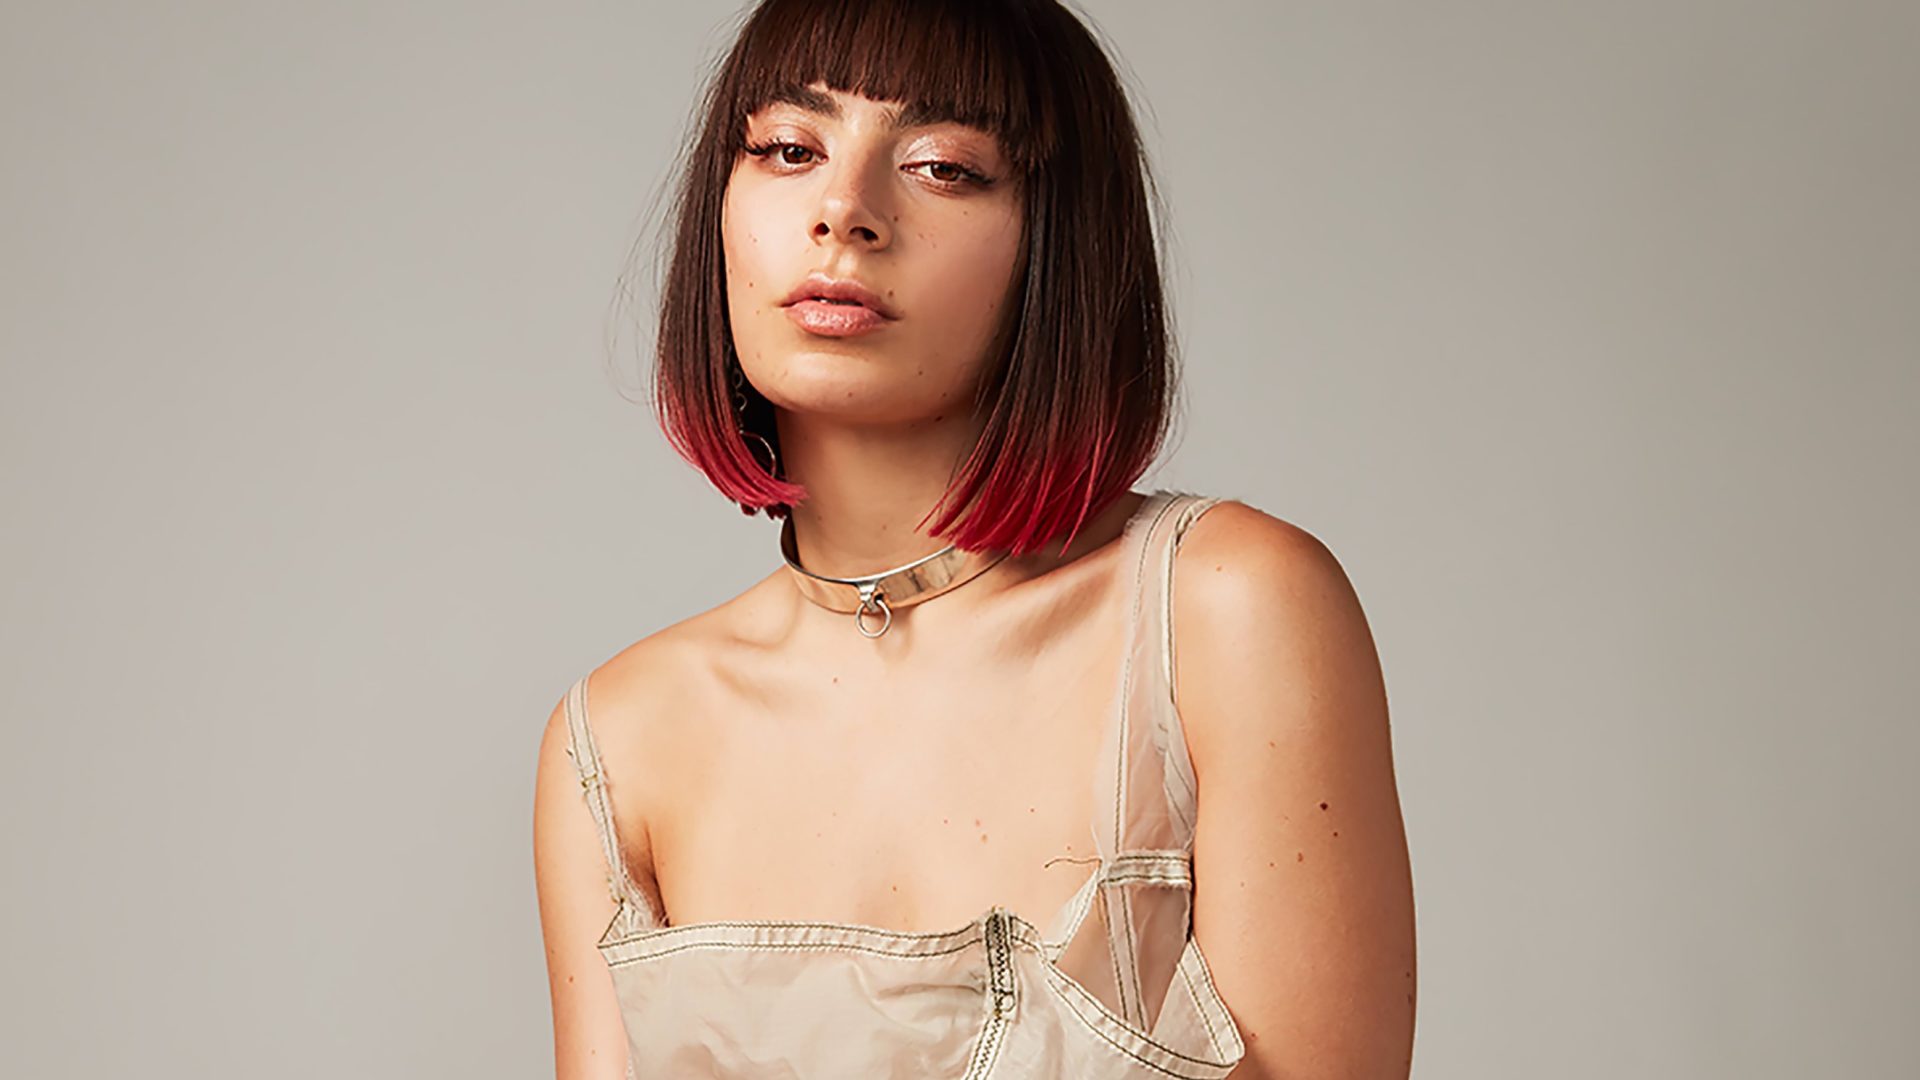 WATCH: Charli XCX Announces Third Album and Drops It On Your Love” Video - FLOOD